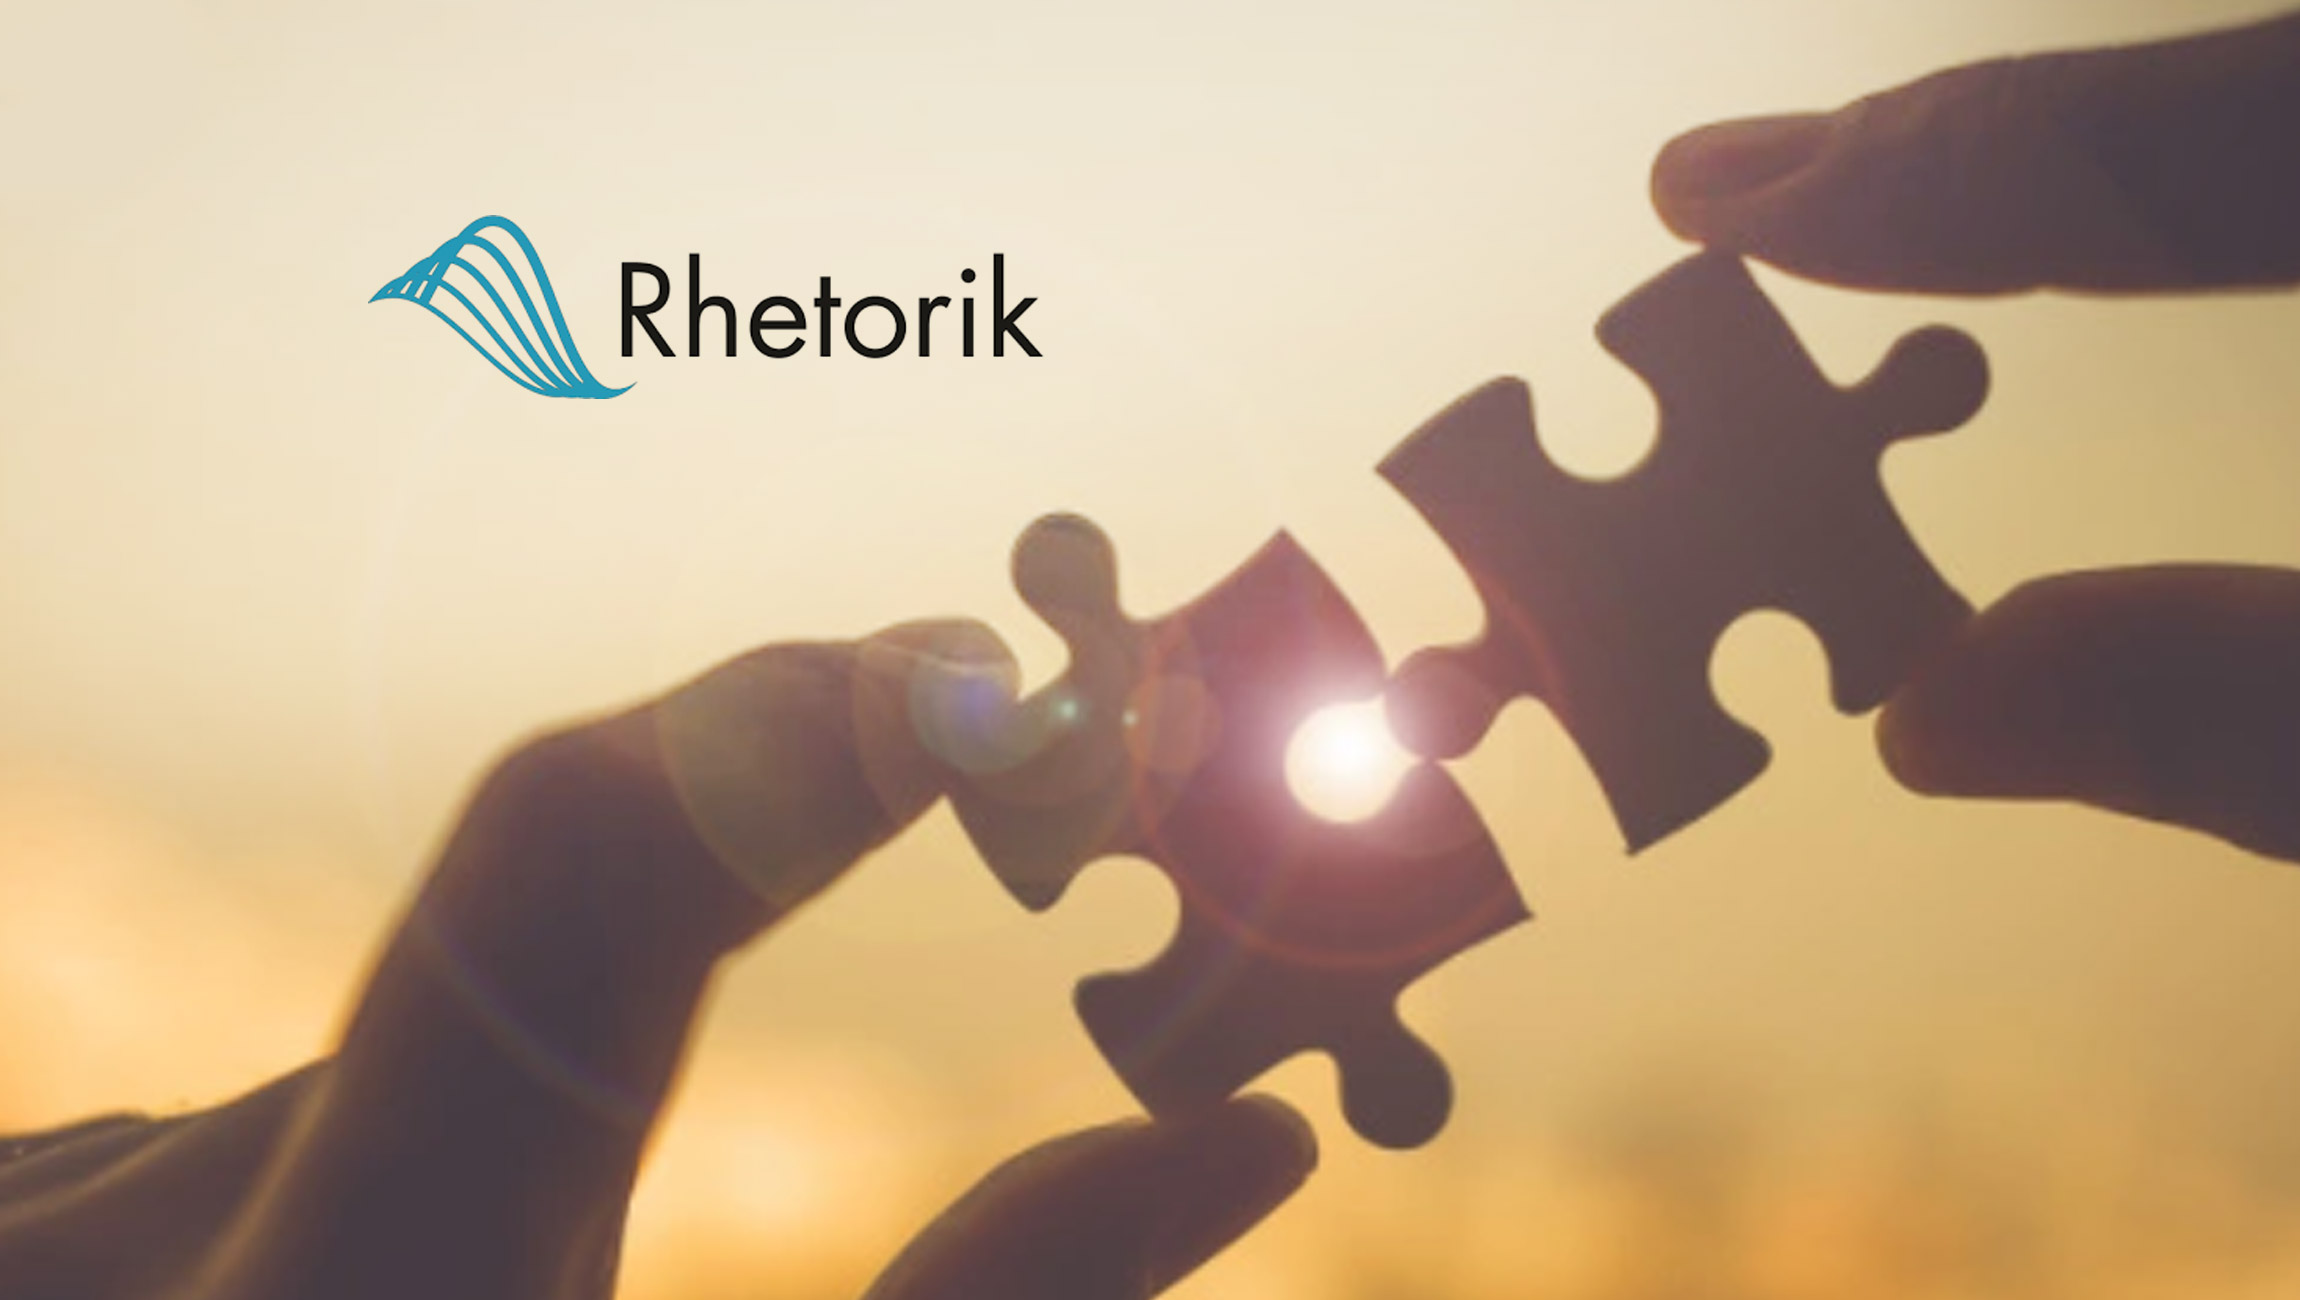 Rhetorik acquires Datarista; adds world-class Data Delivery Technology to its global suite of B2B Intelligence and Data Hygiene Services